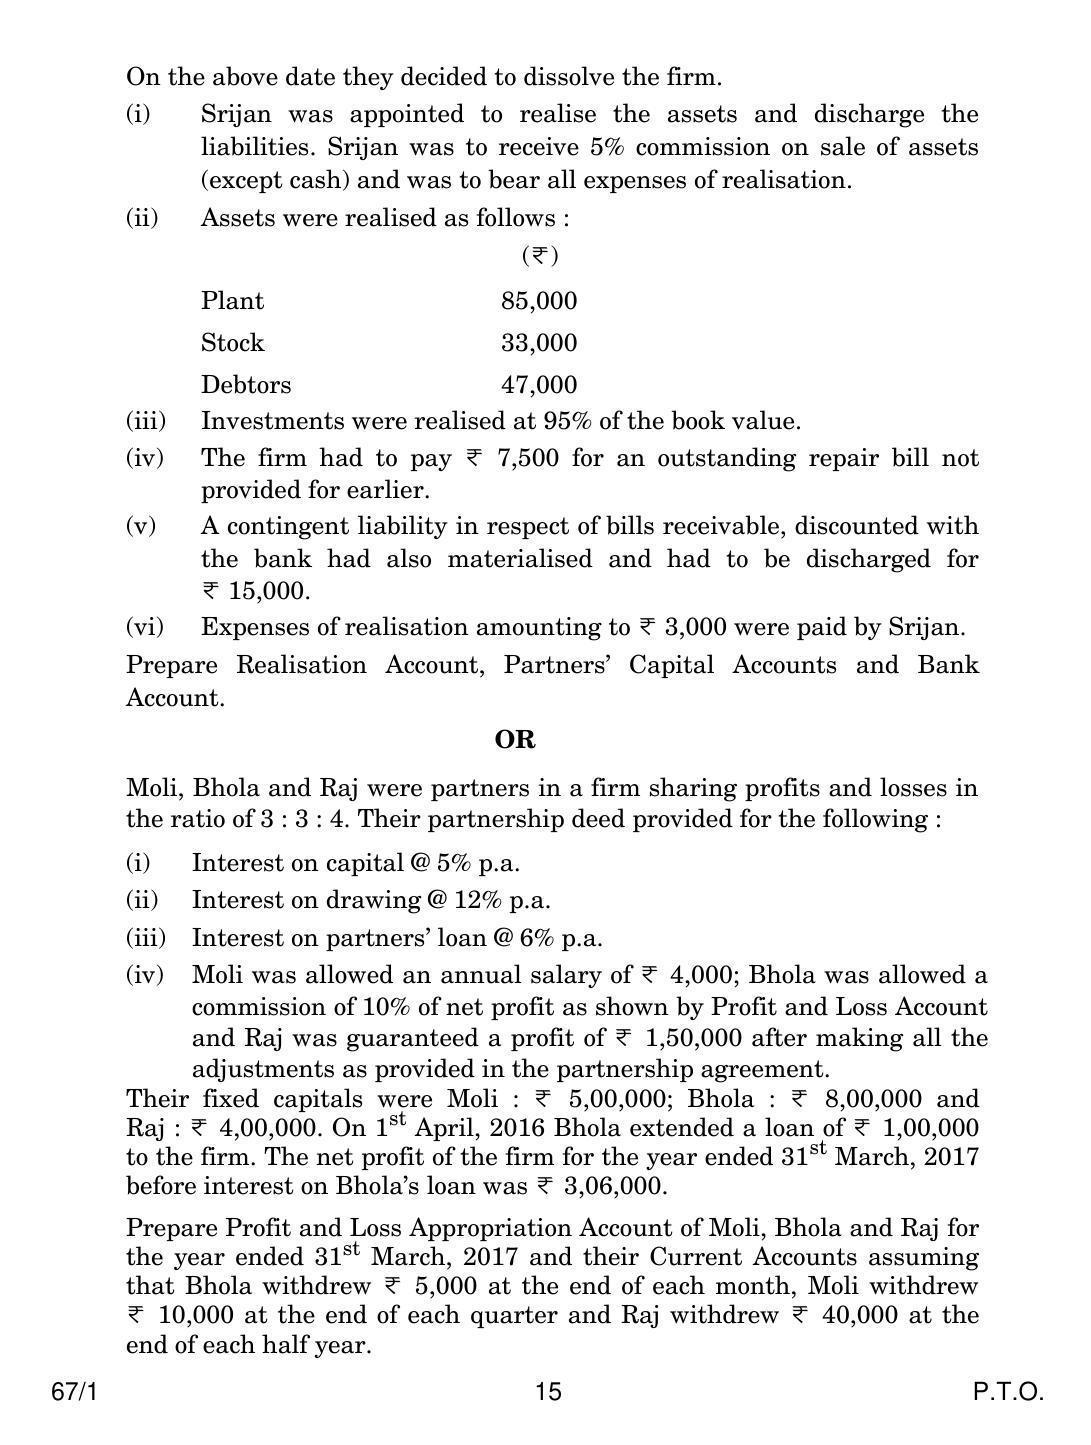 CBSE Class 12 67-1 ACCOUNTANCY 2018 Question Paper - Page 15